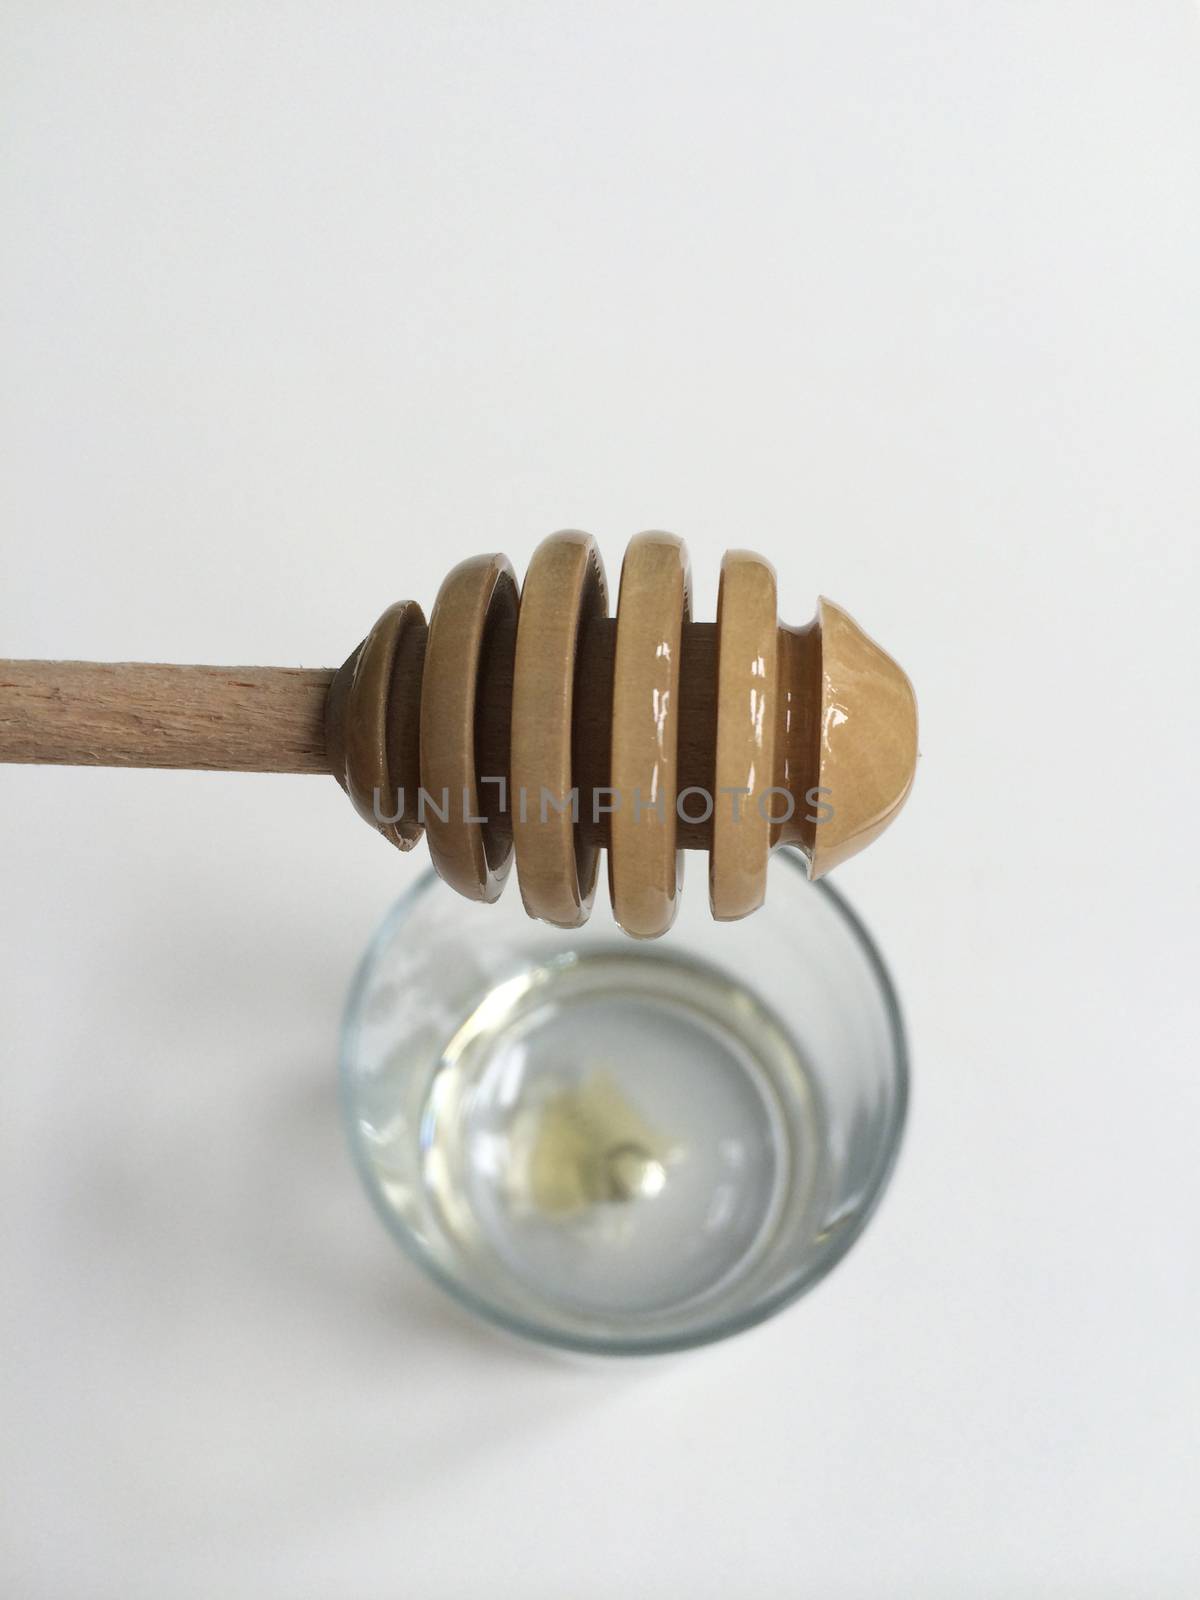 Used honey dipper dripping in glass